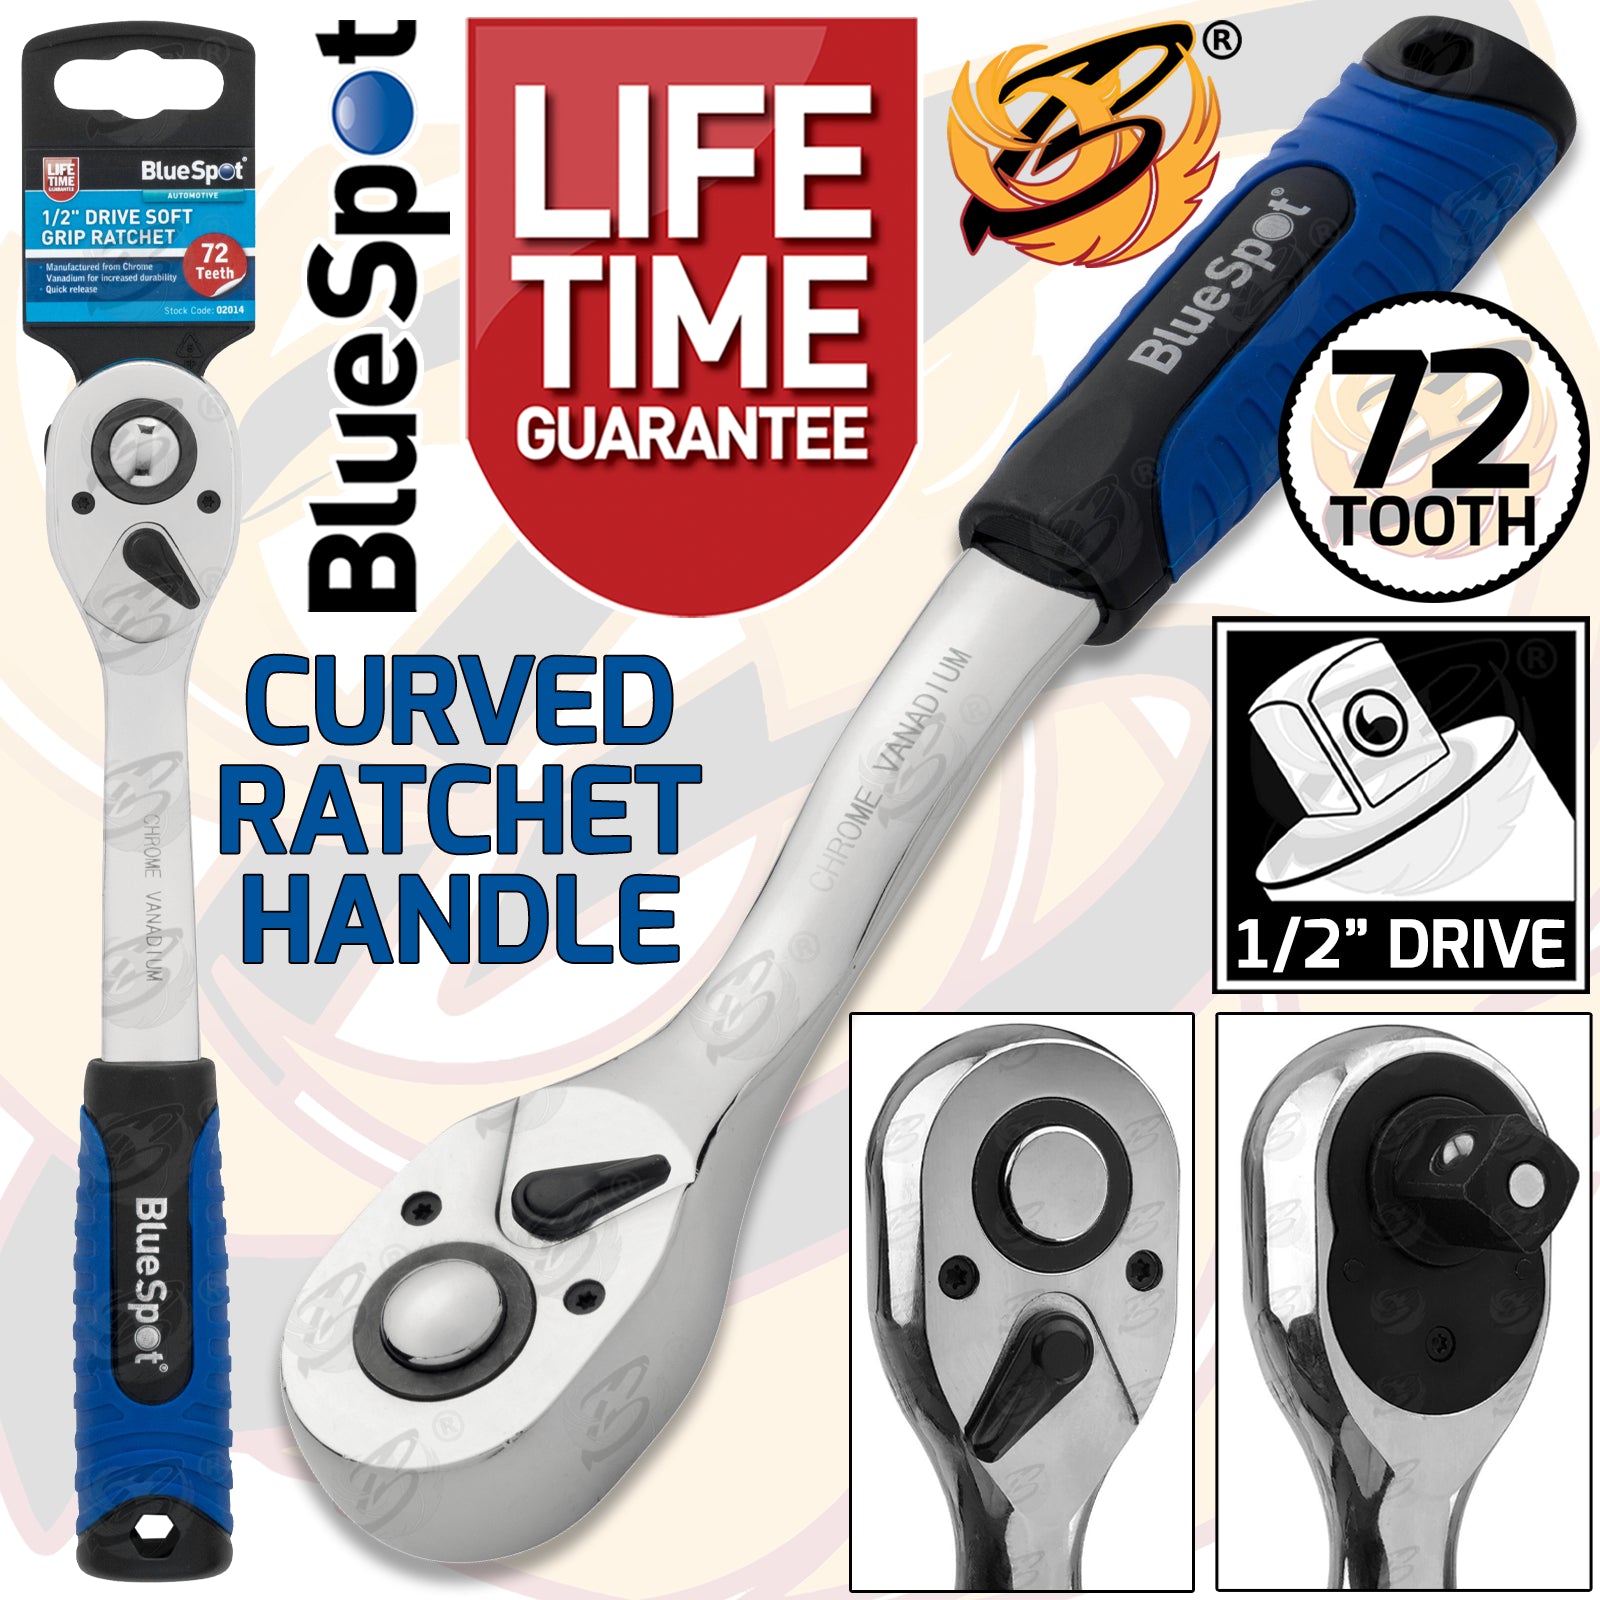 BLUESPOT 1/2" DRIVE 72 TOOTH SOFT GRIP CURVED RATCHET HANDLE